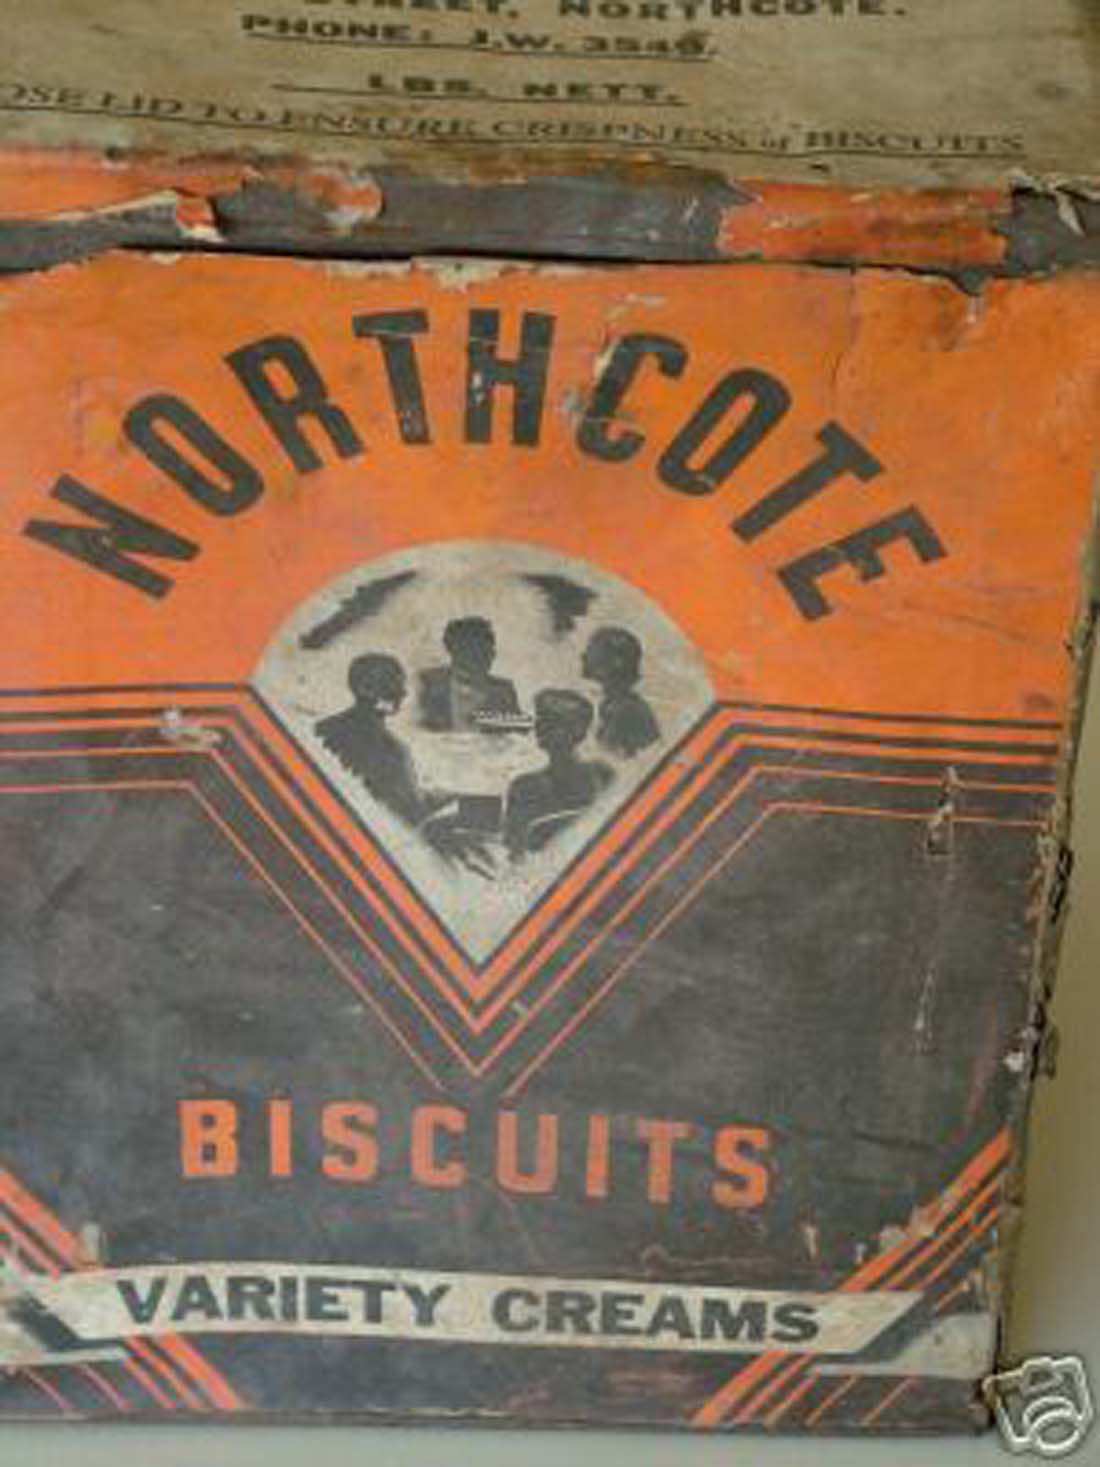 Image of Northcote Biscuits tin circa 1940s